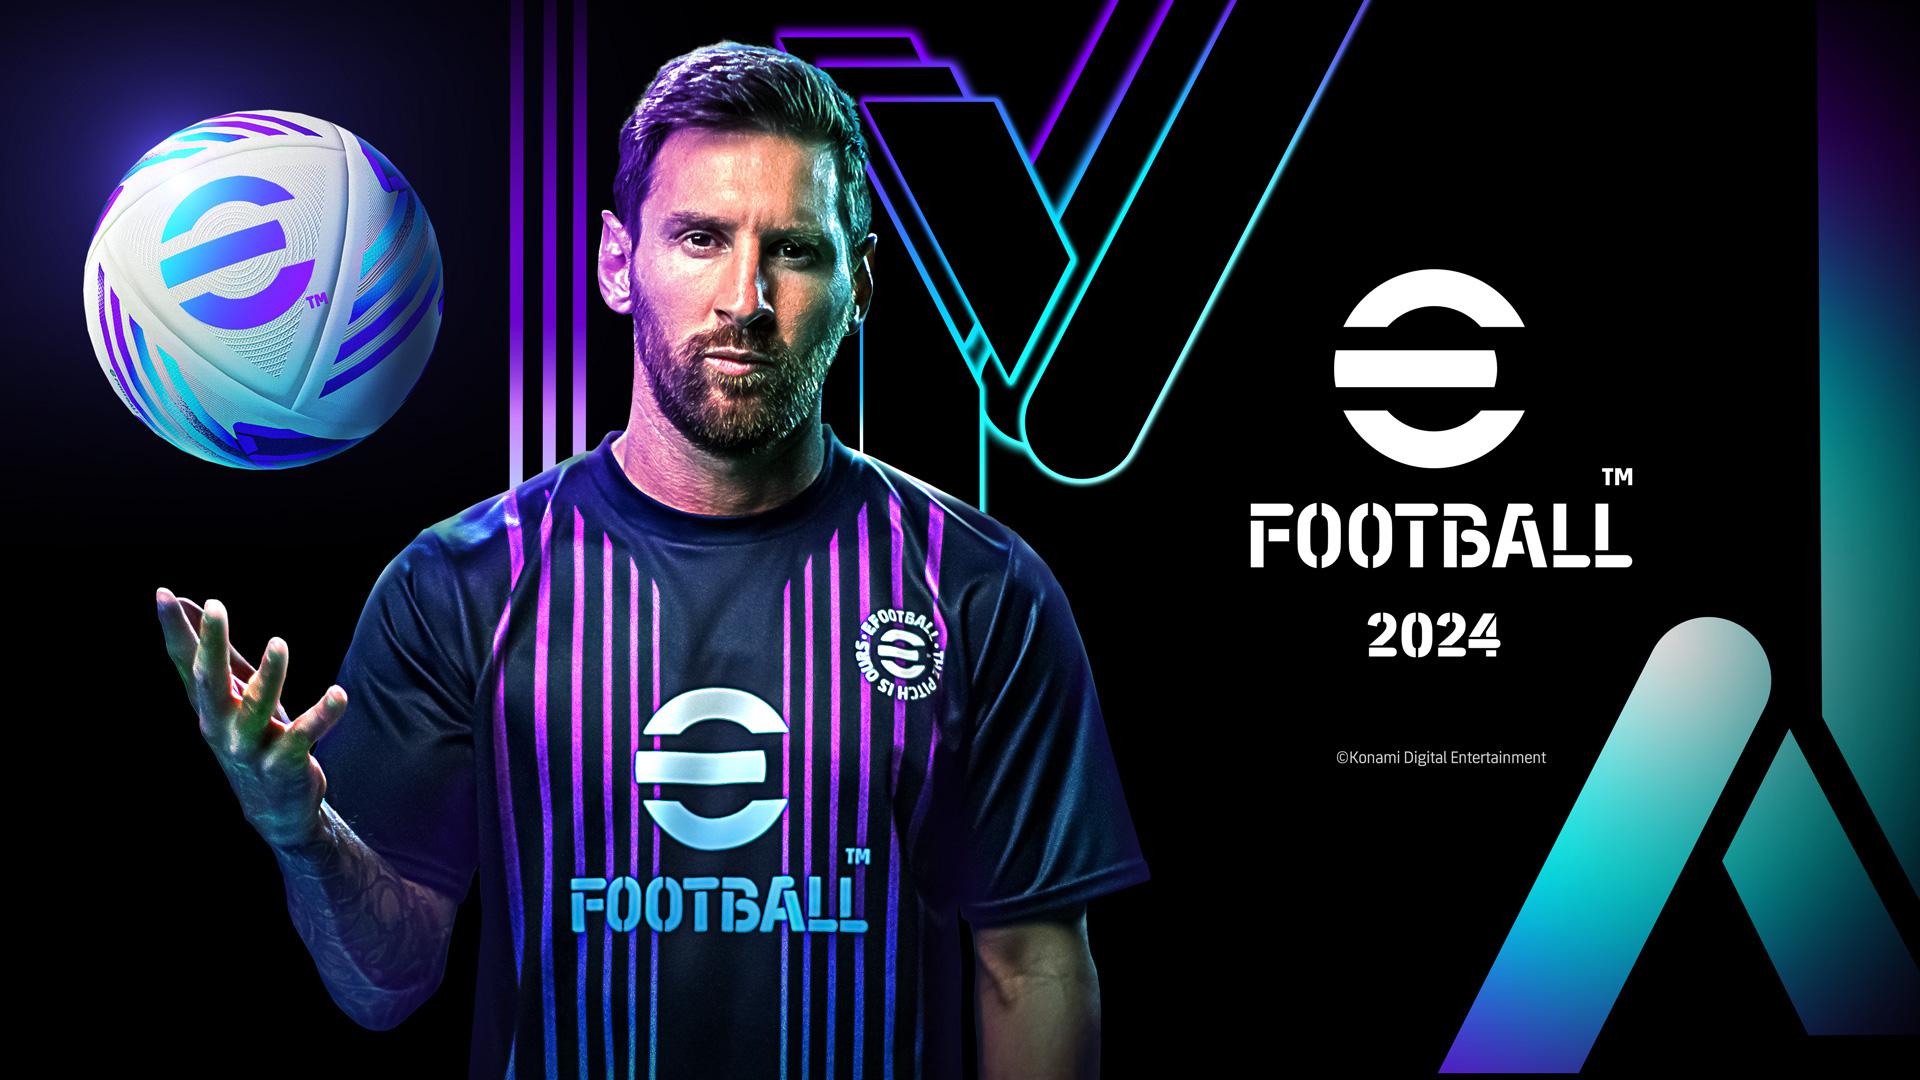 A Football Frenzy: Konami Celebrates 750 Million Downloads with Messi, Inter Campaign and In-Game Events!